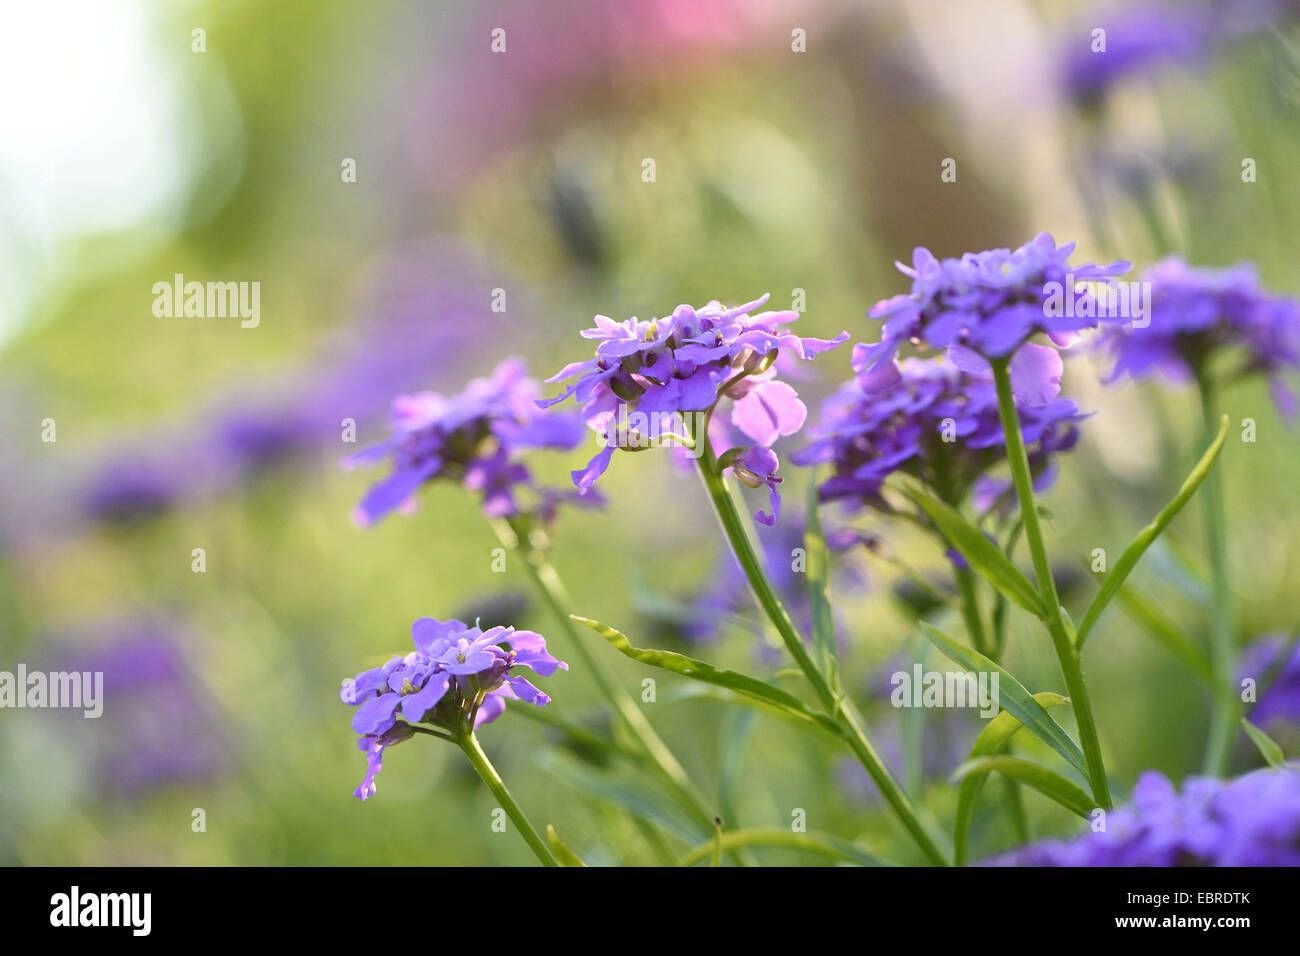 globe candytuft, umbellate candytuft, common candy-tuft (Iberis umbellata), blooming Stock Photo